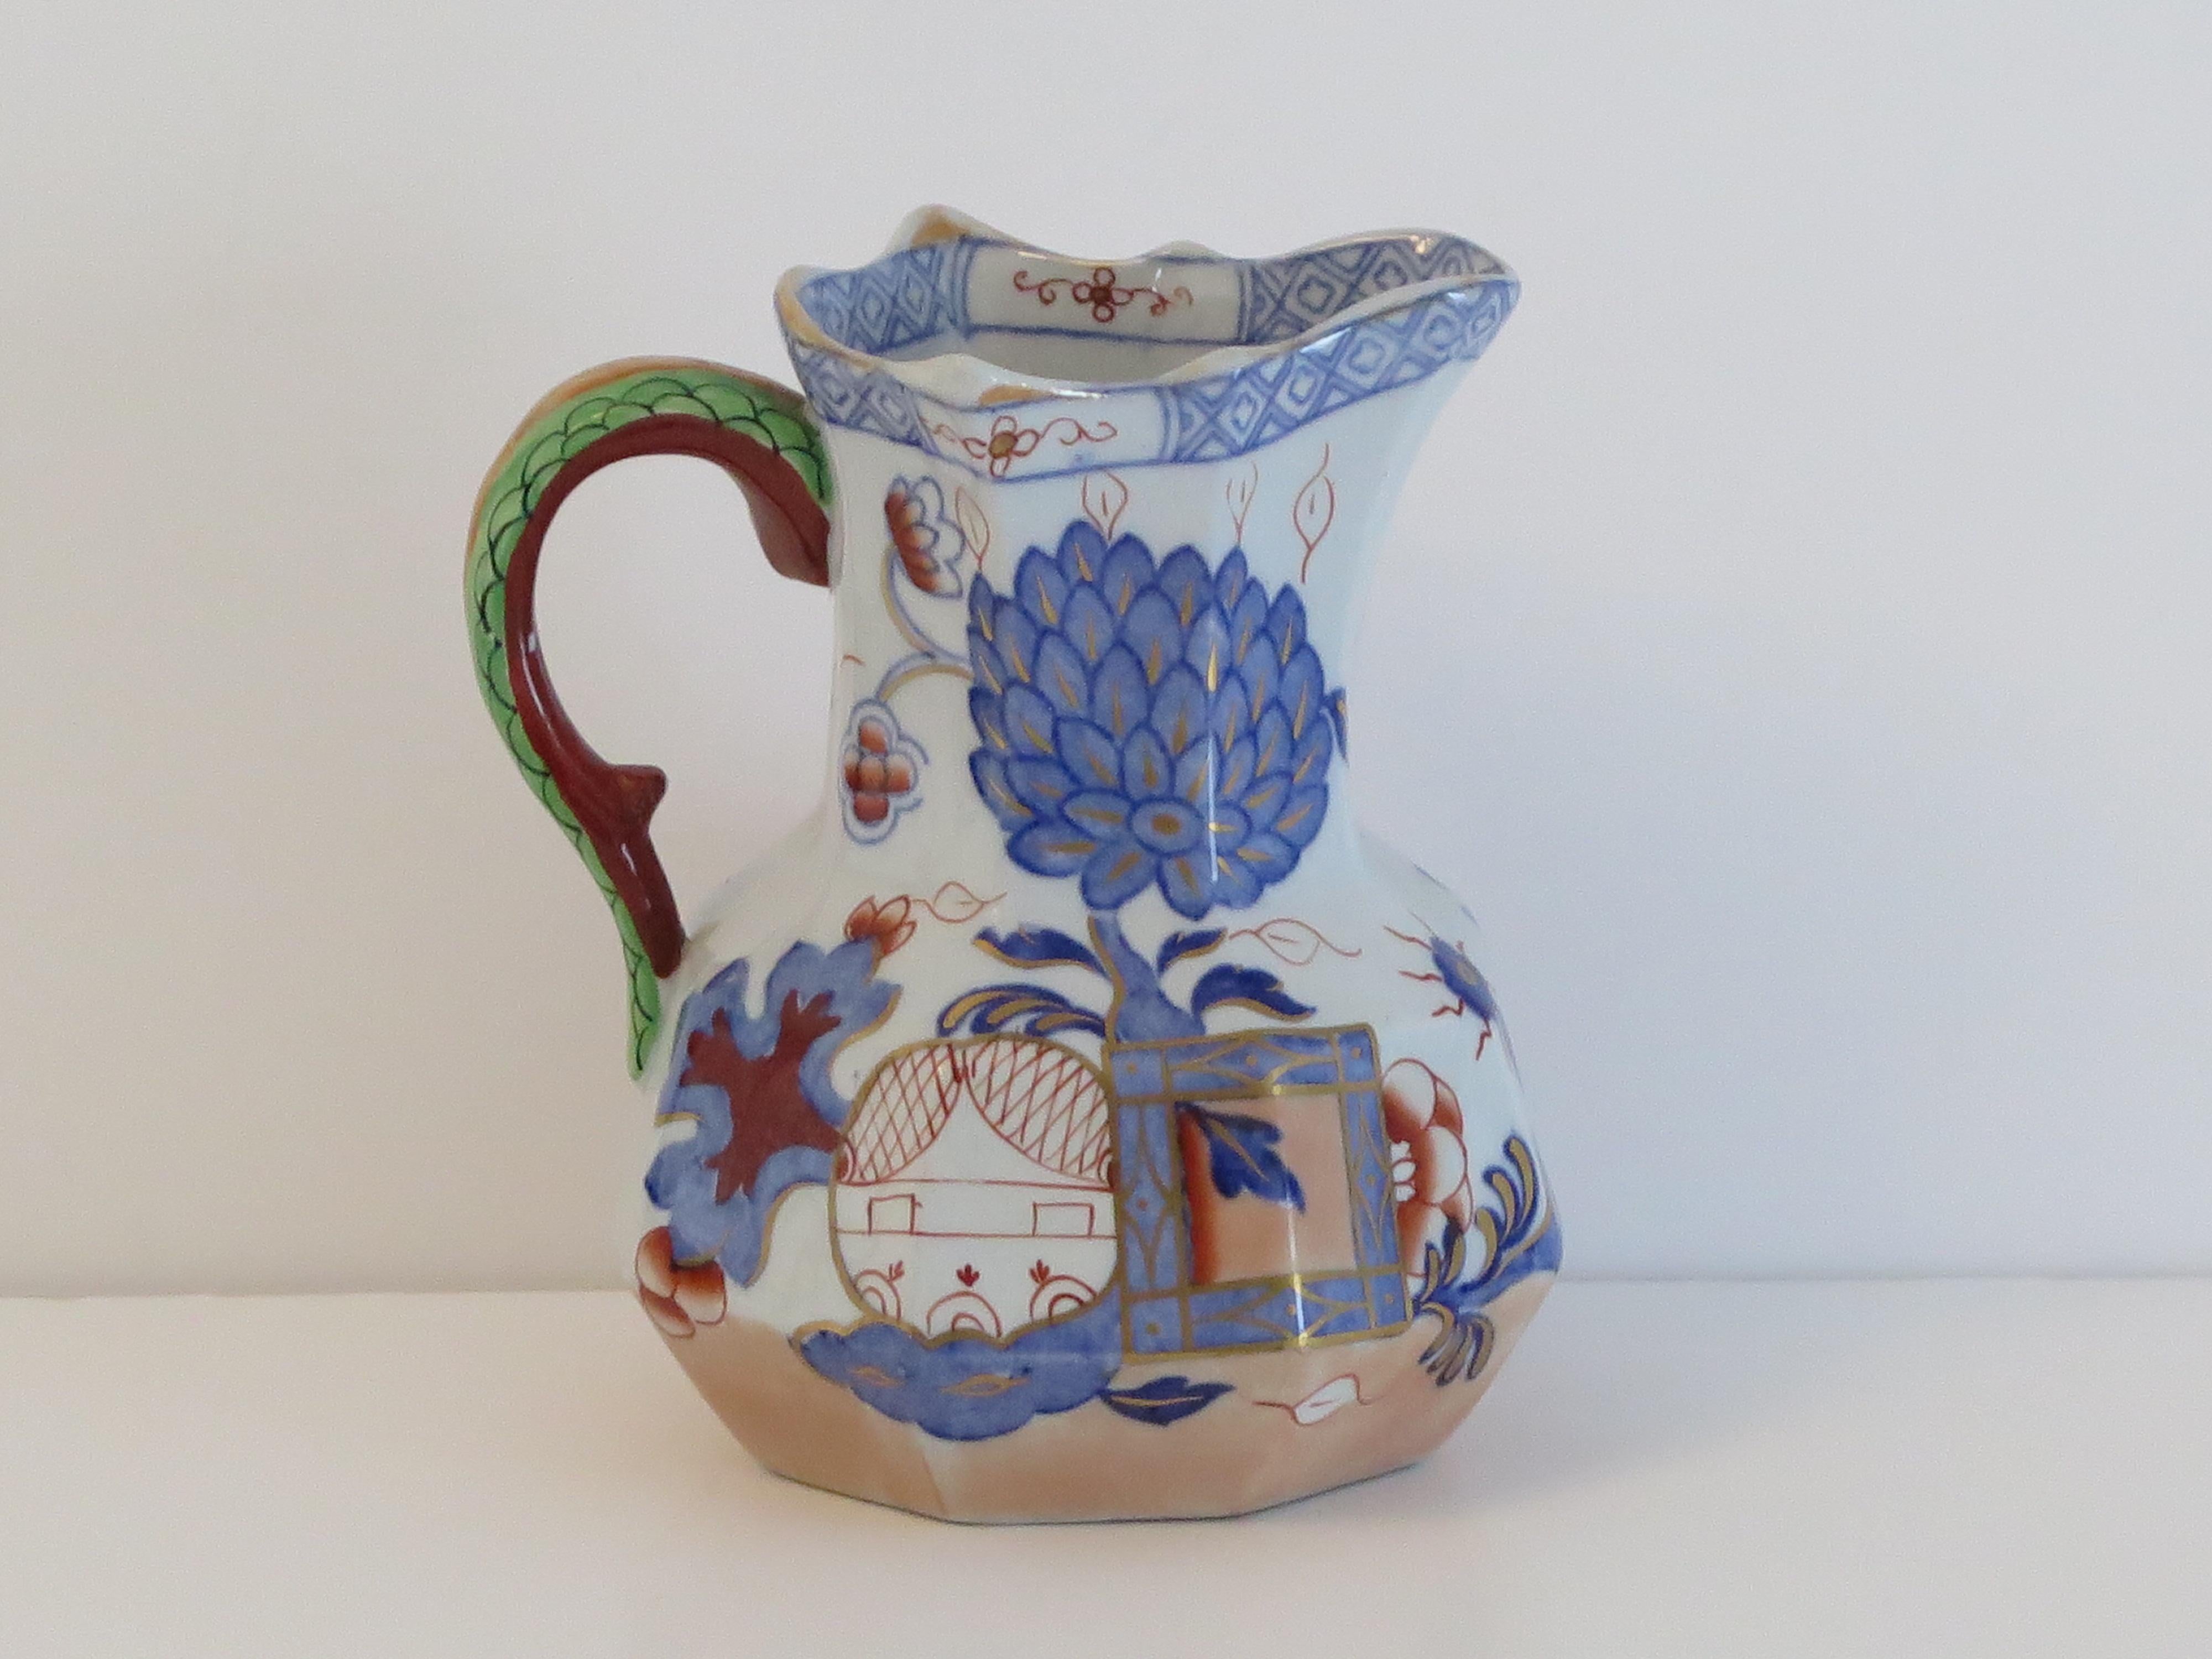 This is a very good Ironstone hydra jug or pitcher in the jardinière pattern and made by Mason's Ironstone, England, circa 1870.

The pattern is a known Mason's chinoiserie pattern called 